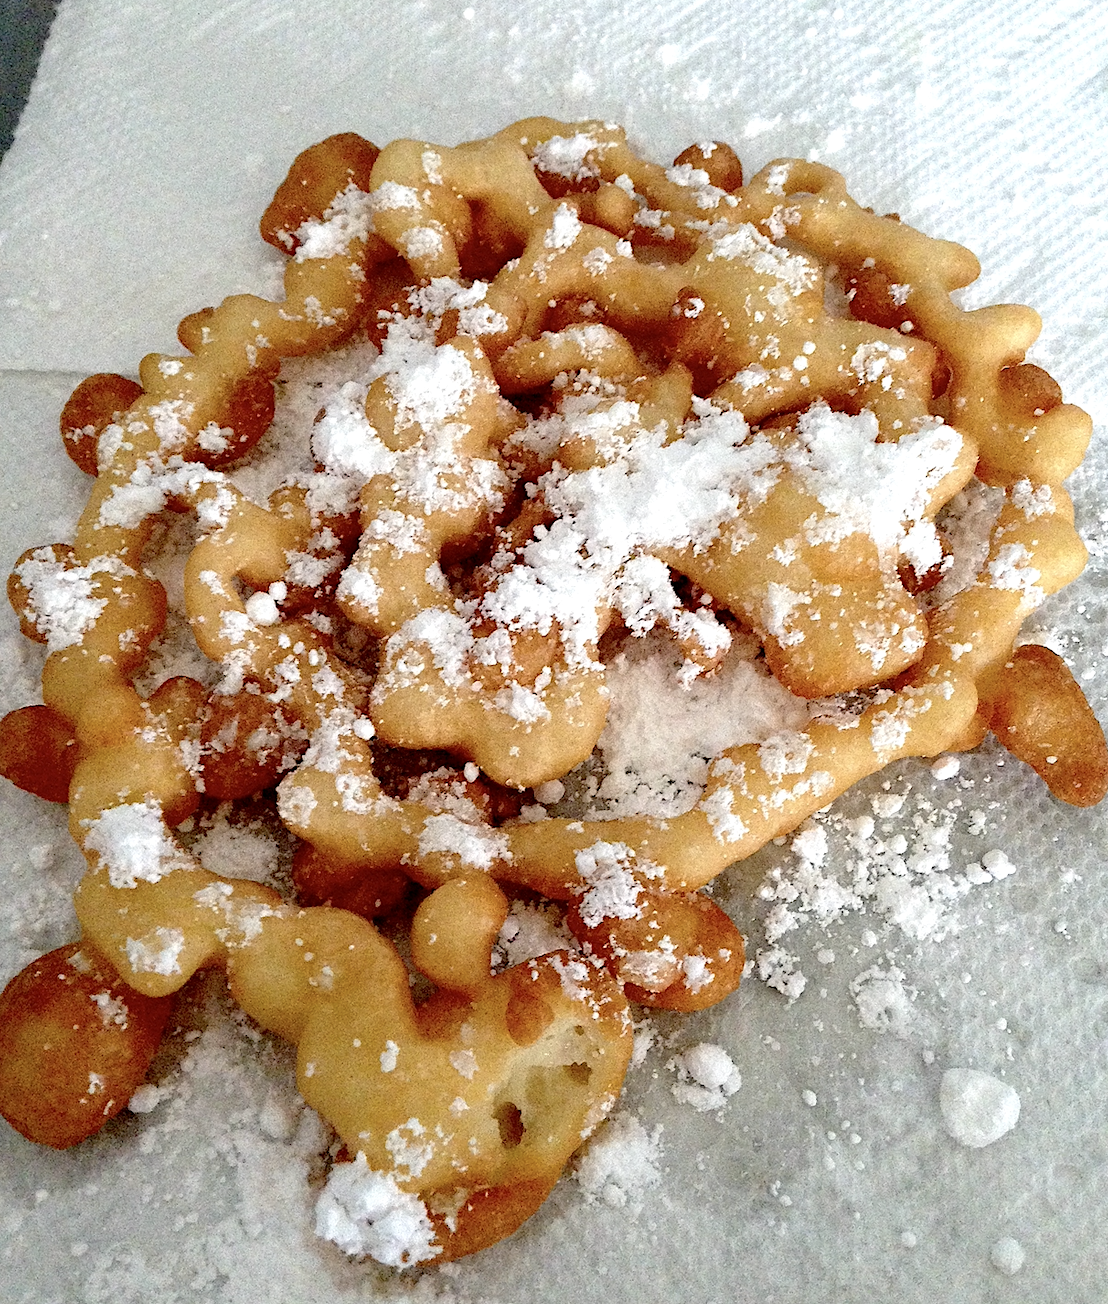 Funnel Cake png images | PNGWing